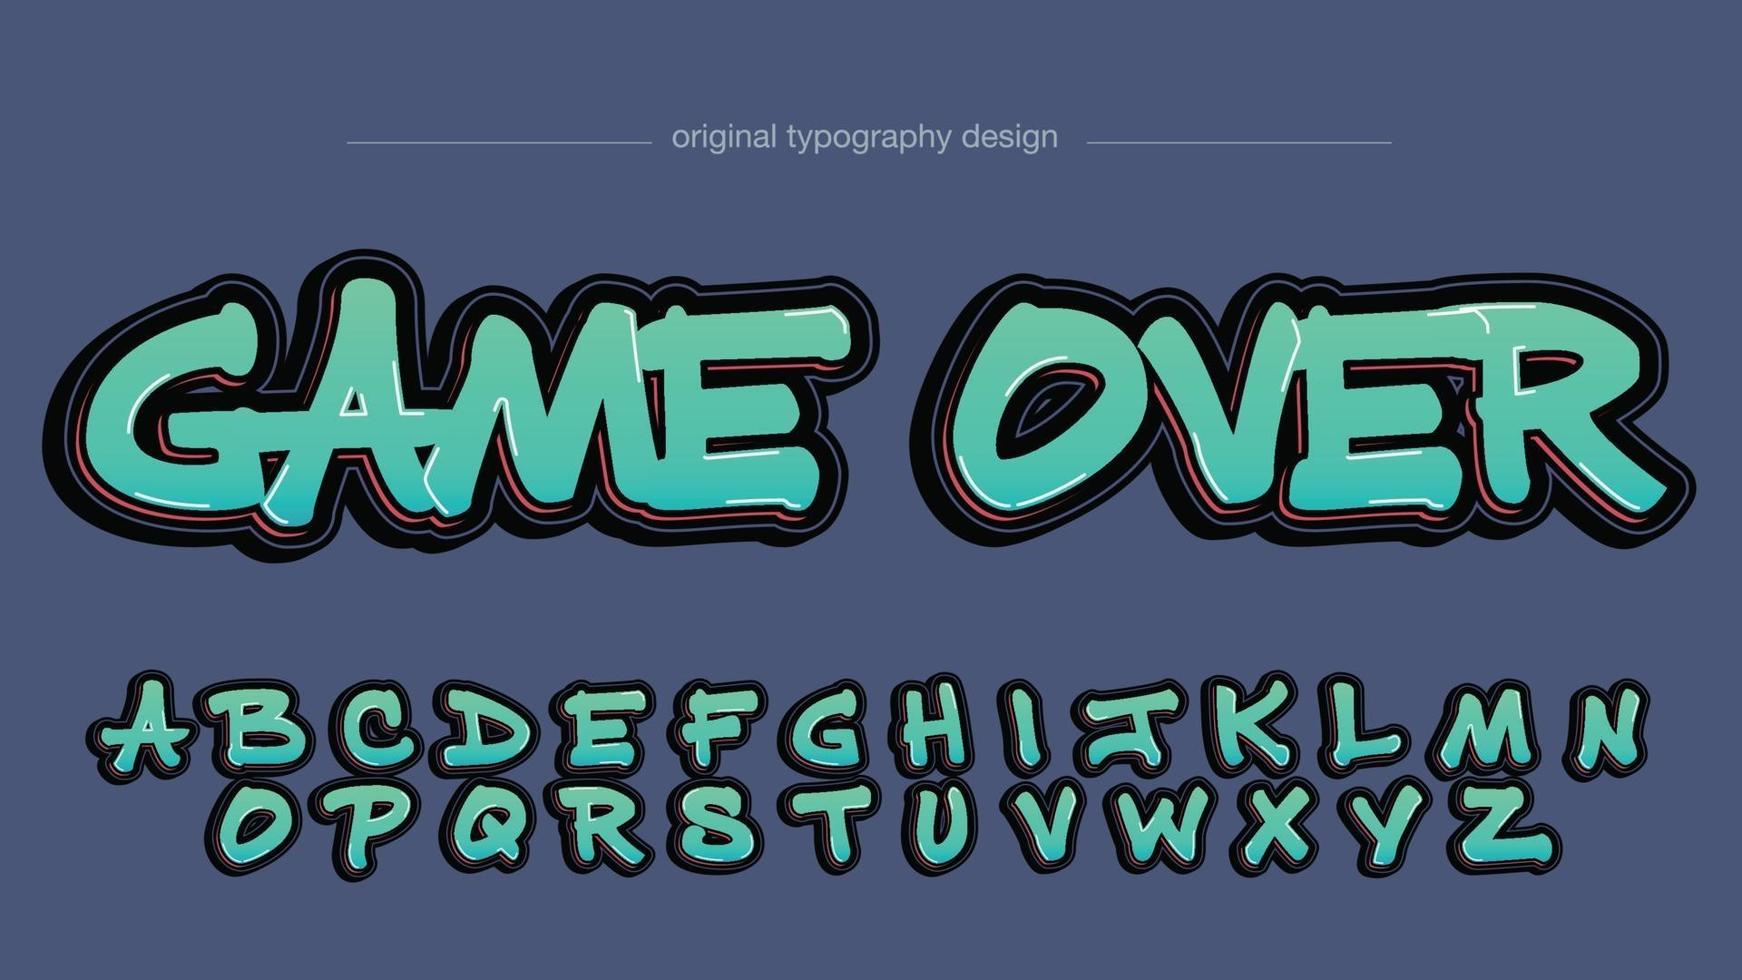 Green and Red Bold Graffiti Style Typography vector